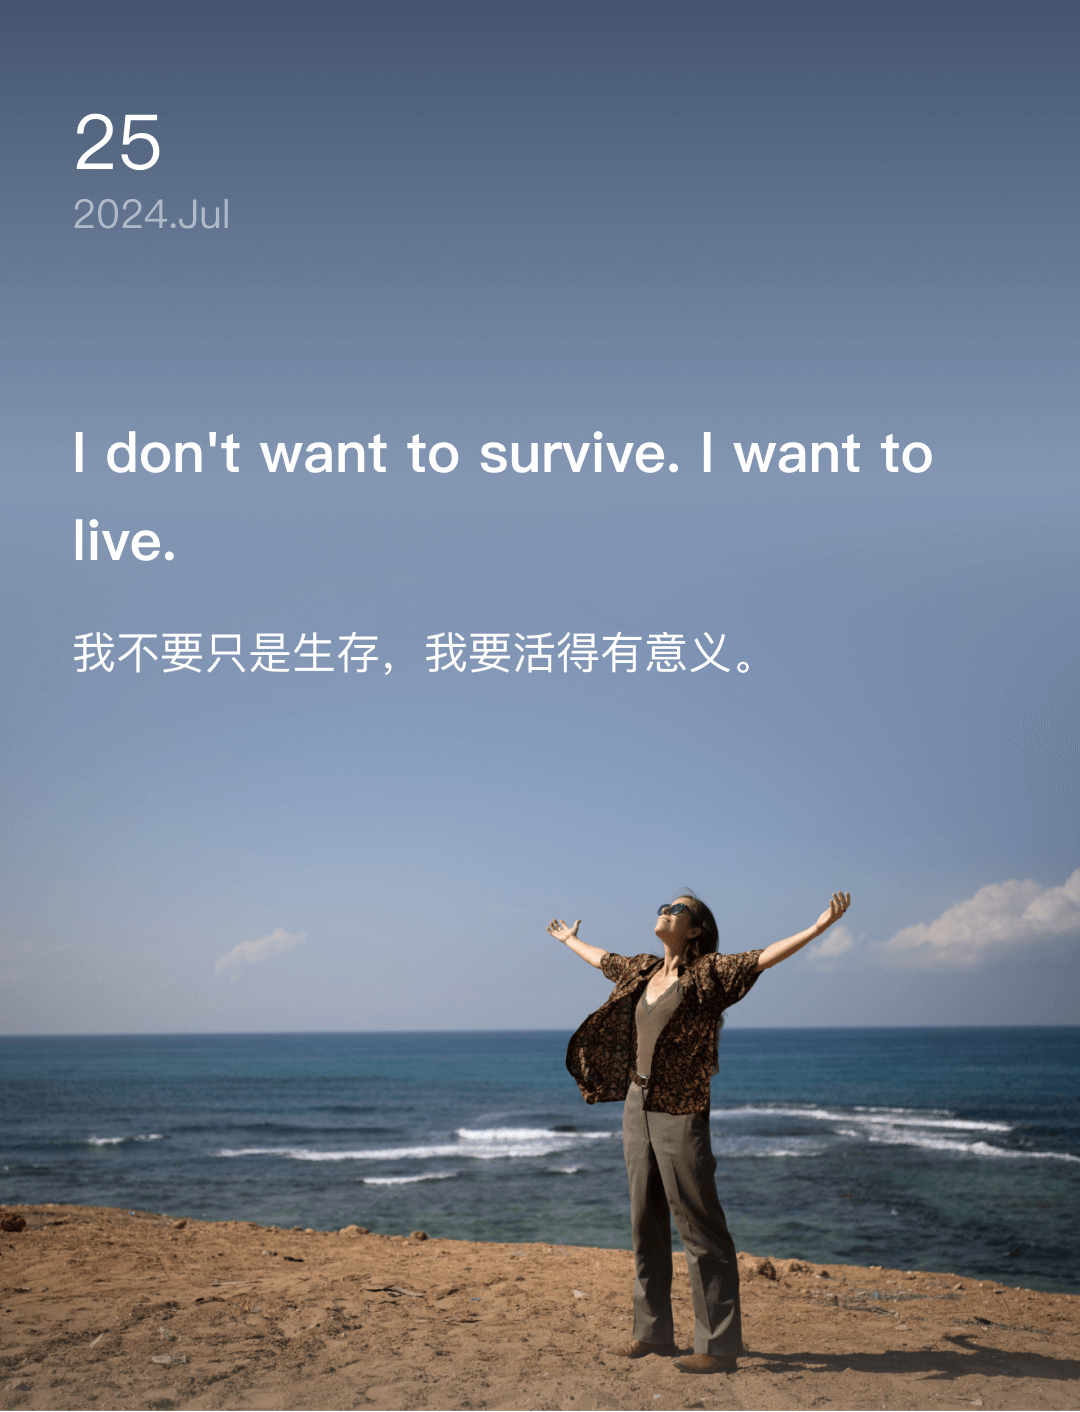 I don't want to survive. I want to live.